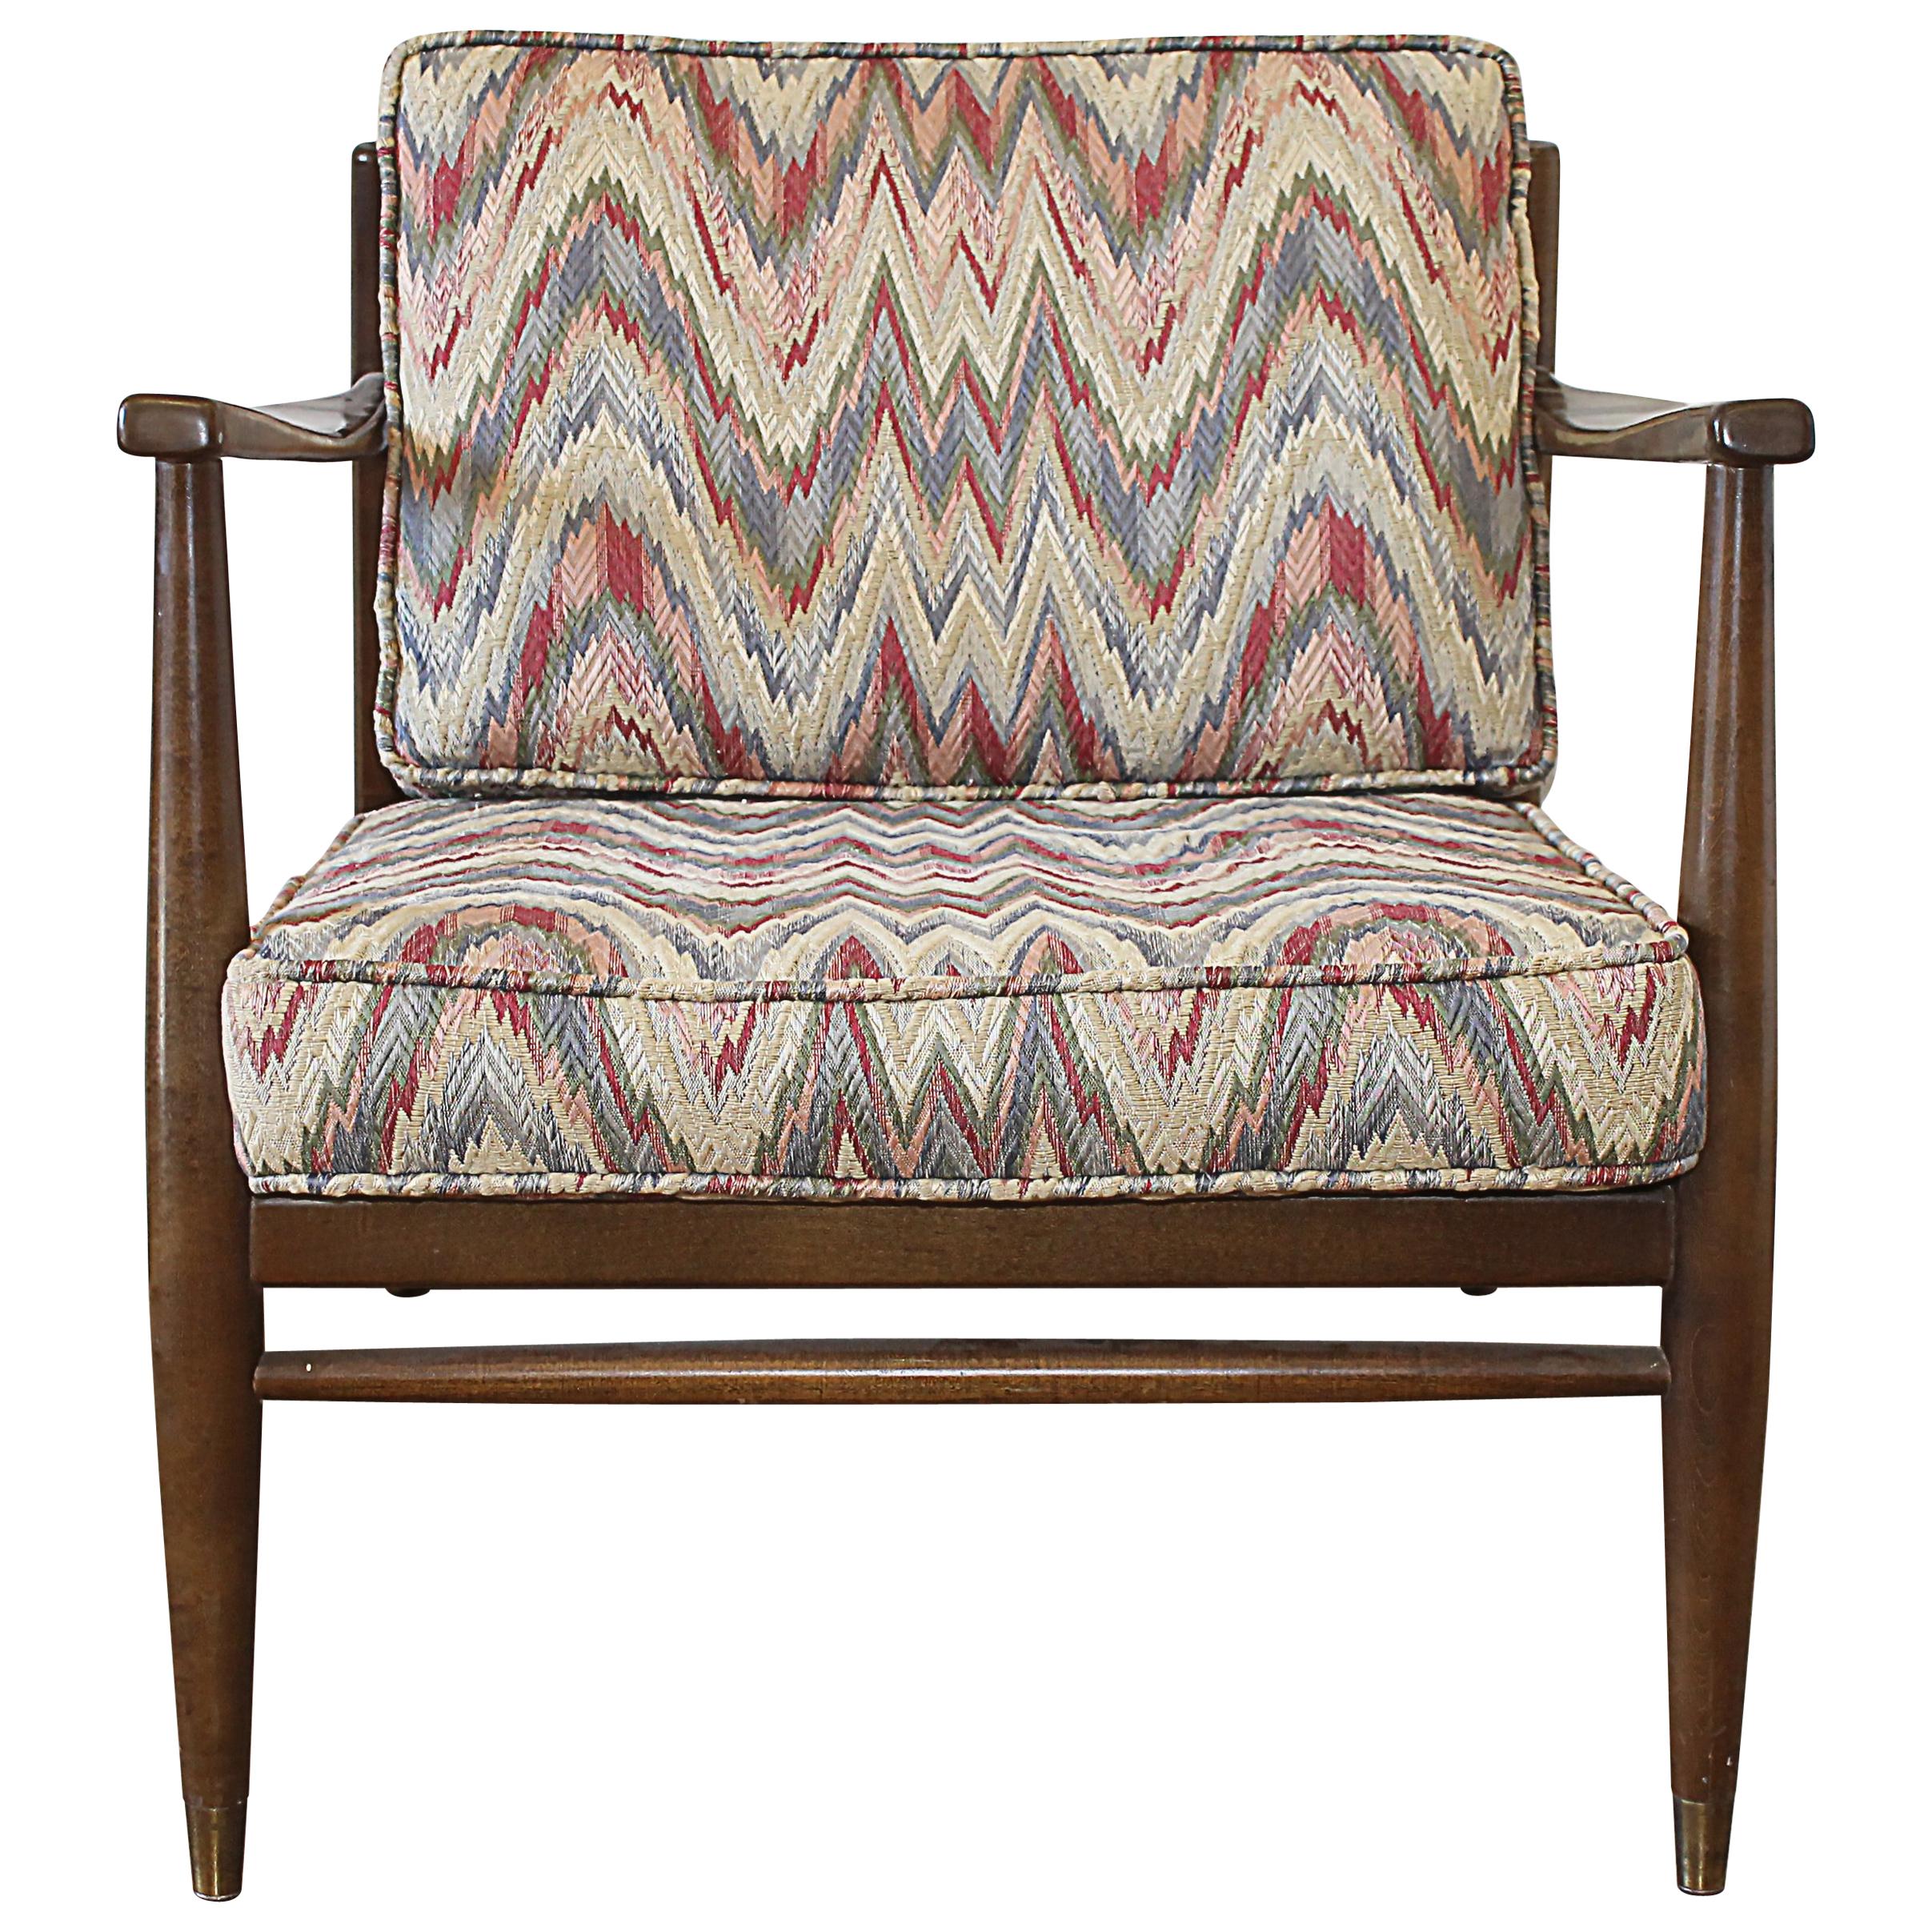 Danish Modern Chair with Flame Stitch Upholstered Cushions